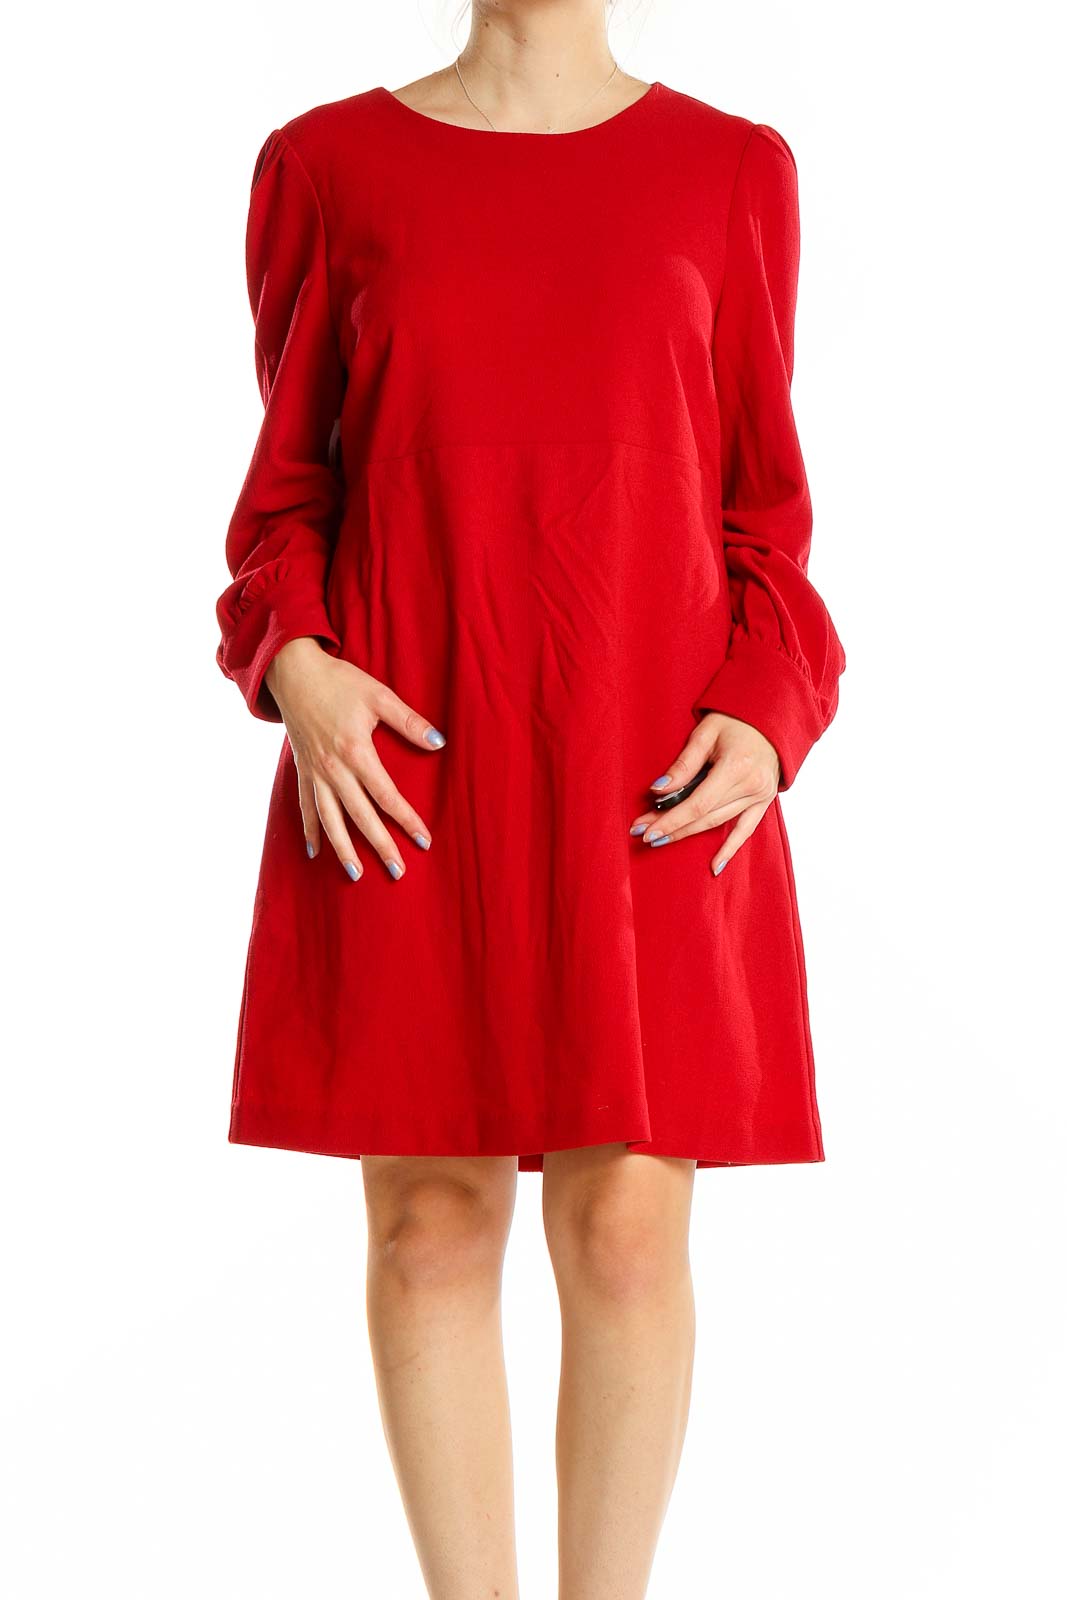 Red Long Sleeve Solid Dress Front